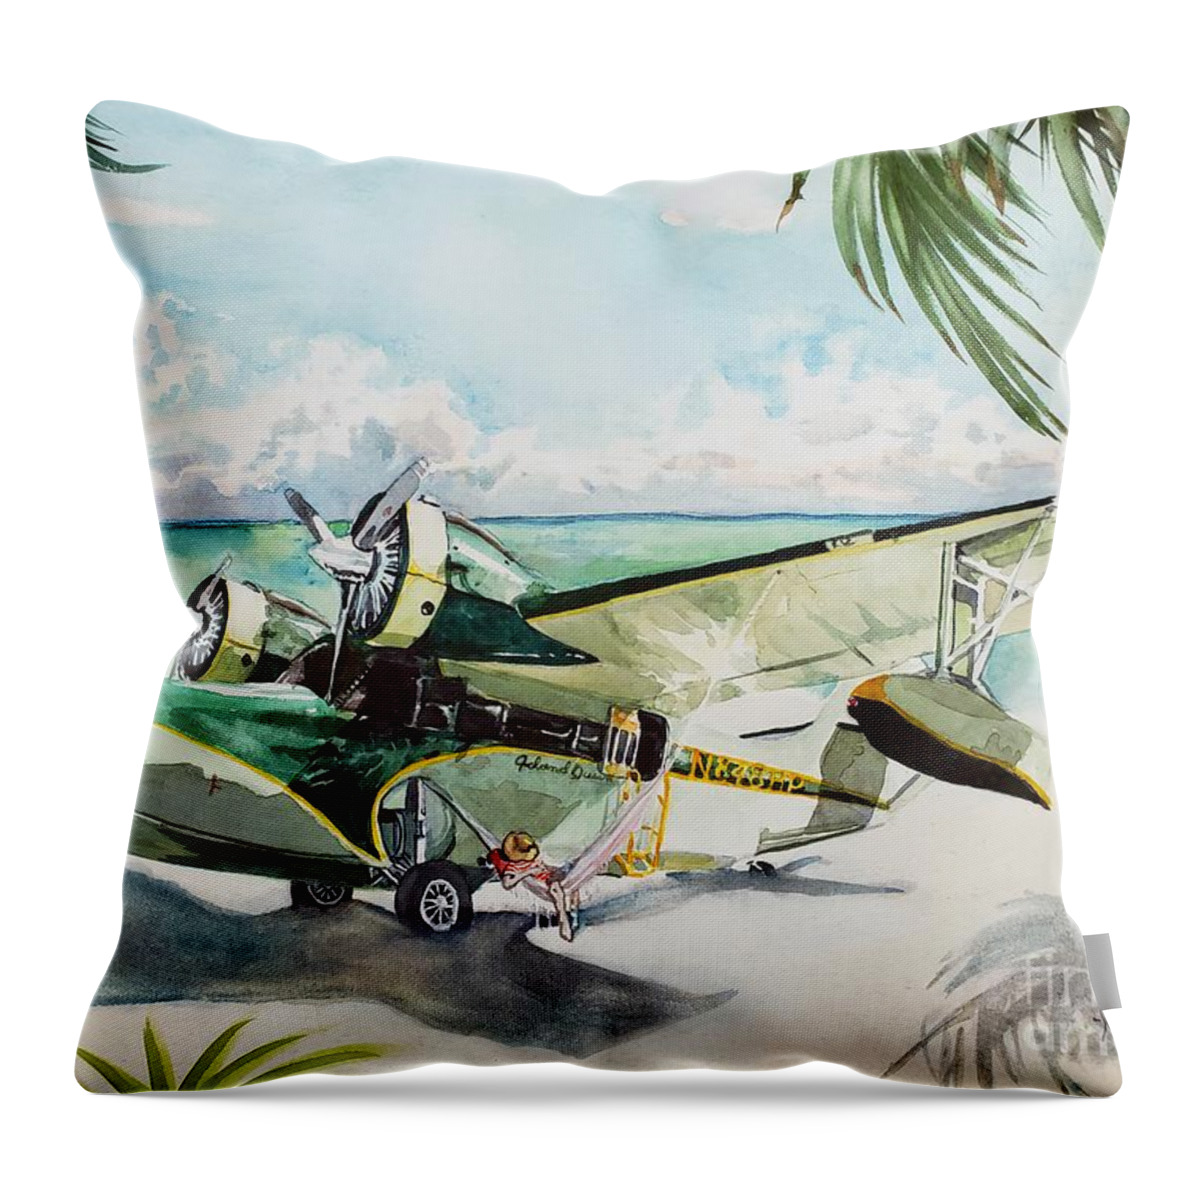 Aviation Throw Pillow featuring the painting Island Queen by Merana Cadorette